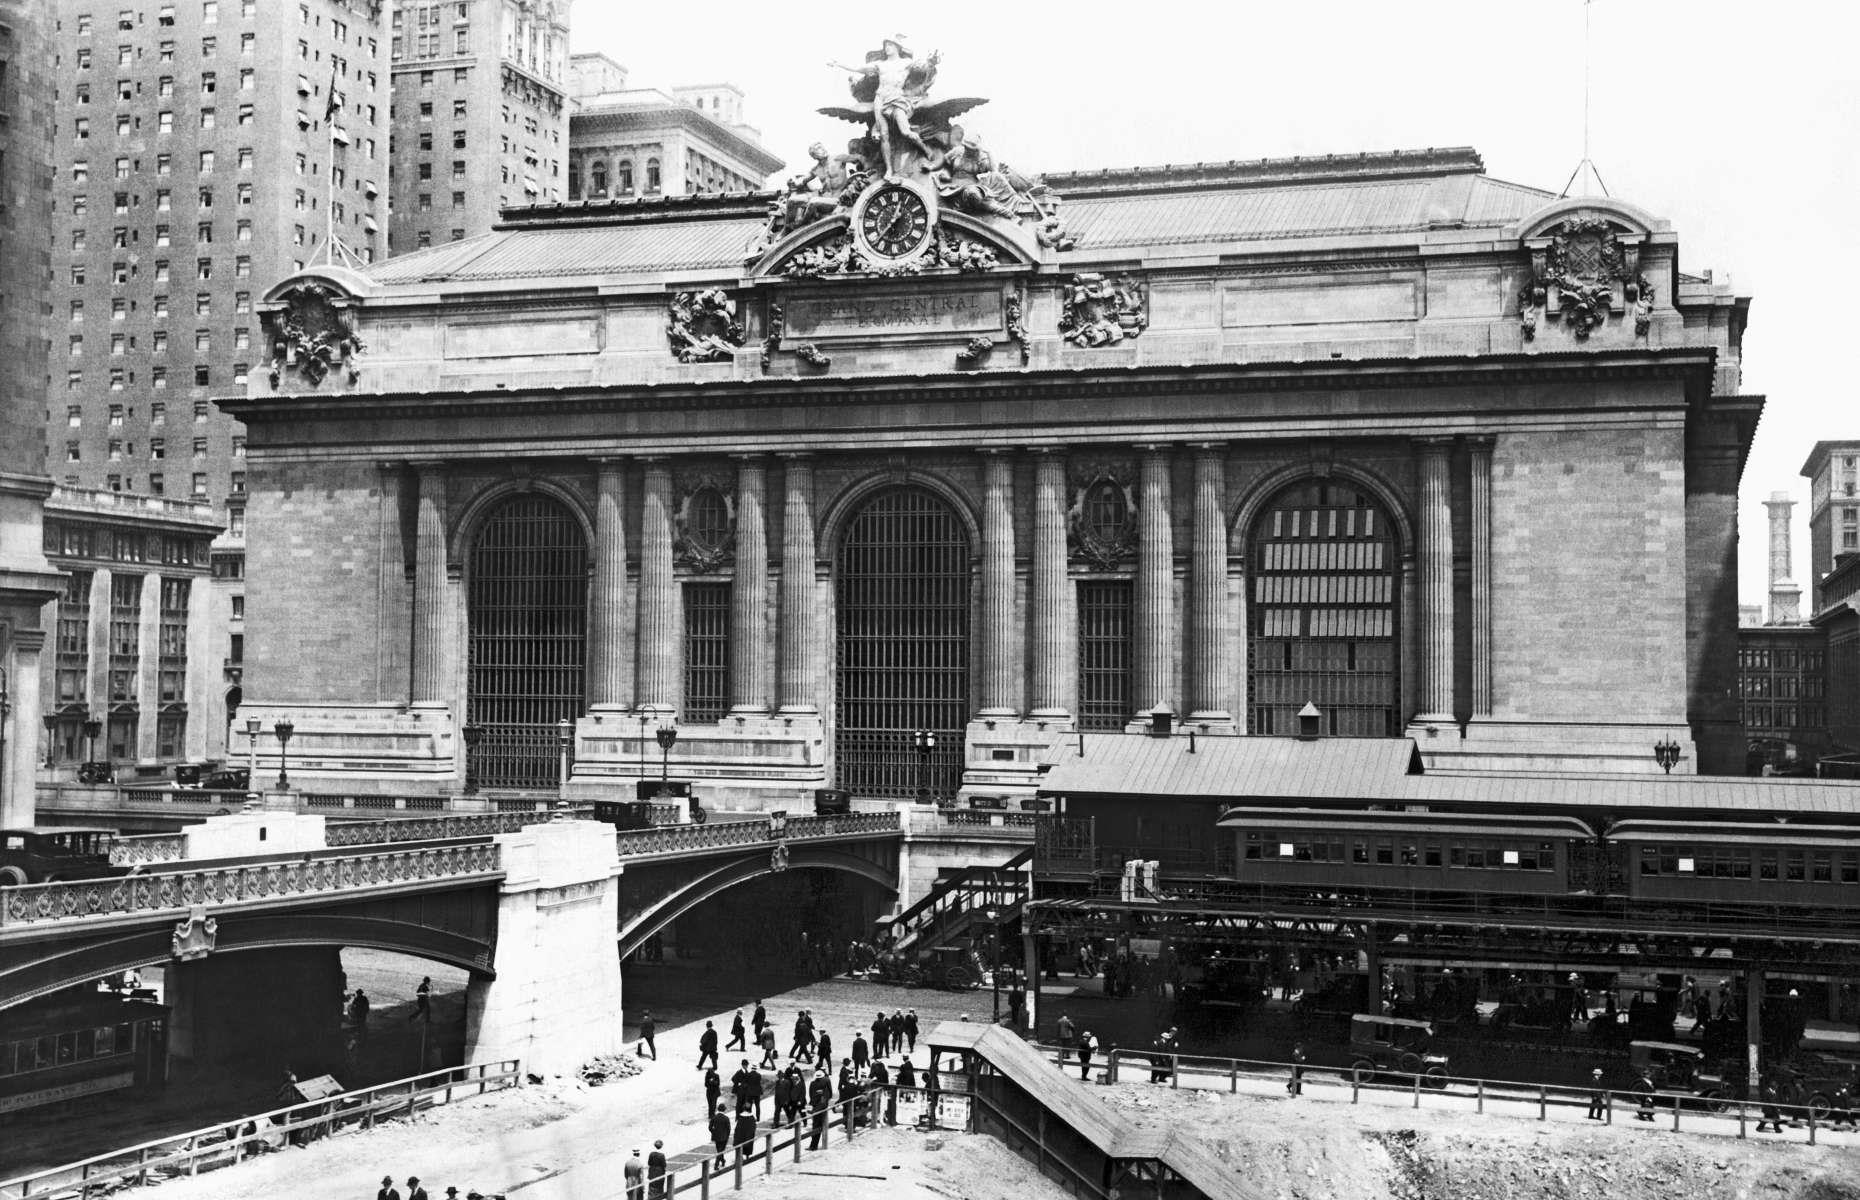 <p>Opened just after midnight on 2 February 1913, Grand Central Terminal quickly became the busiest train station in the US. The station as we know it today was almost lost forever in the 1950s and the 1960s, when it was threatened by proposals to build a tower block either in its place or on top of it. Former first lady Jacqueline Kennedy Onassis was instrumental in campaigning to preserve the building and the station was named a National Historic Landmark in 1976. Here it is pictured in January 1924, with early high-rises just beginning to grow around it.</p>